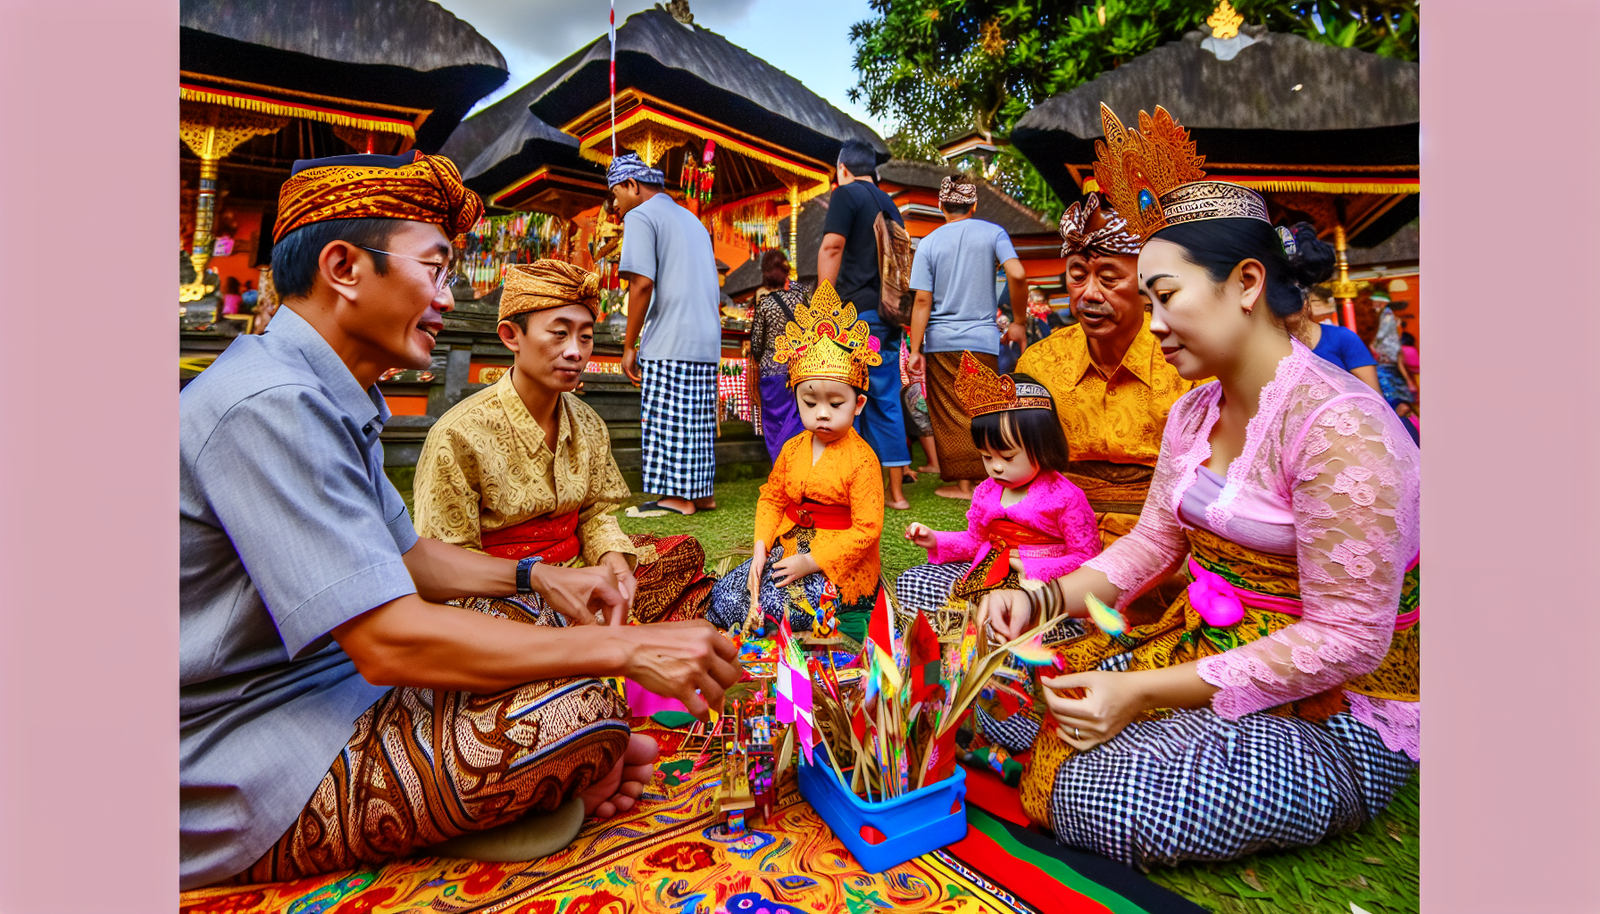 Expat family enjoying a cultural event in Bali